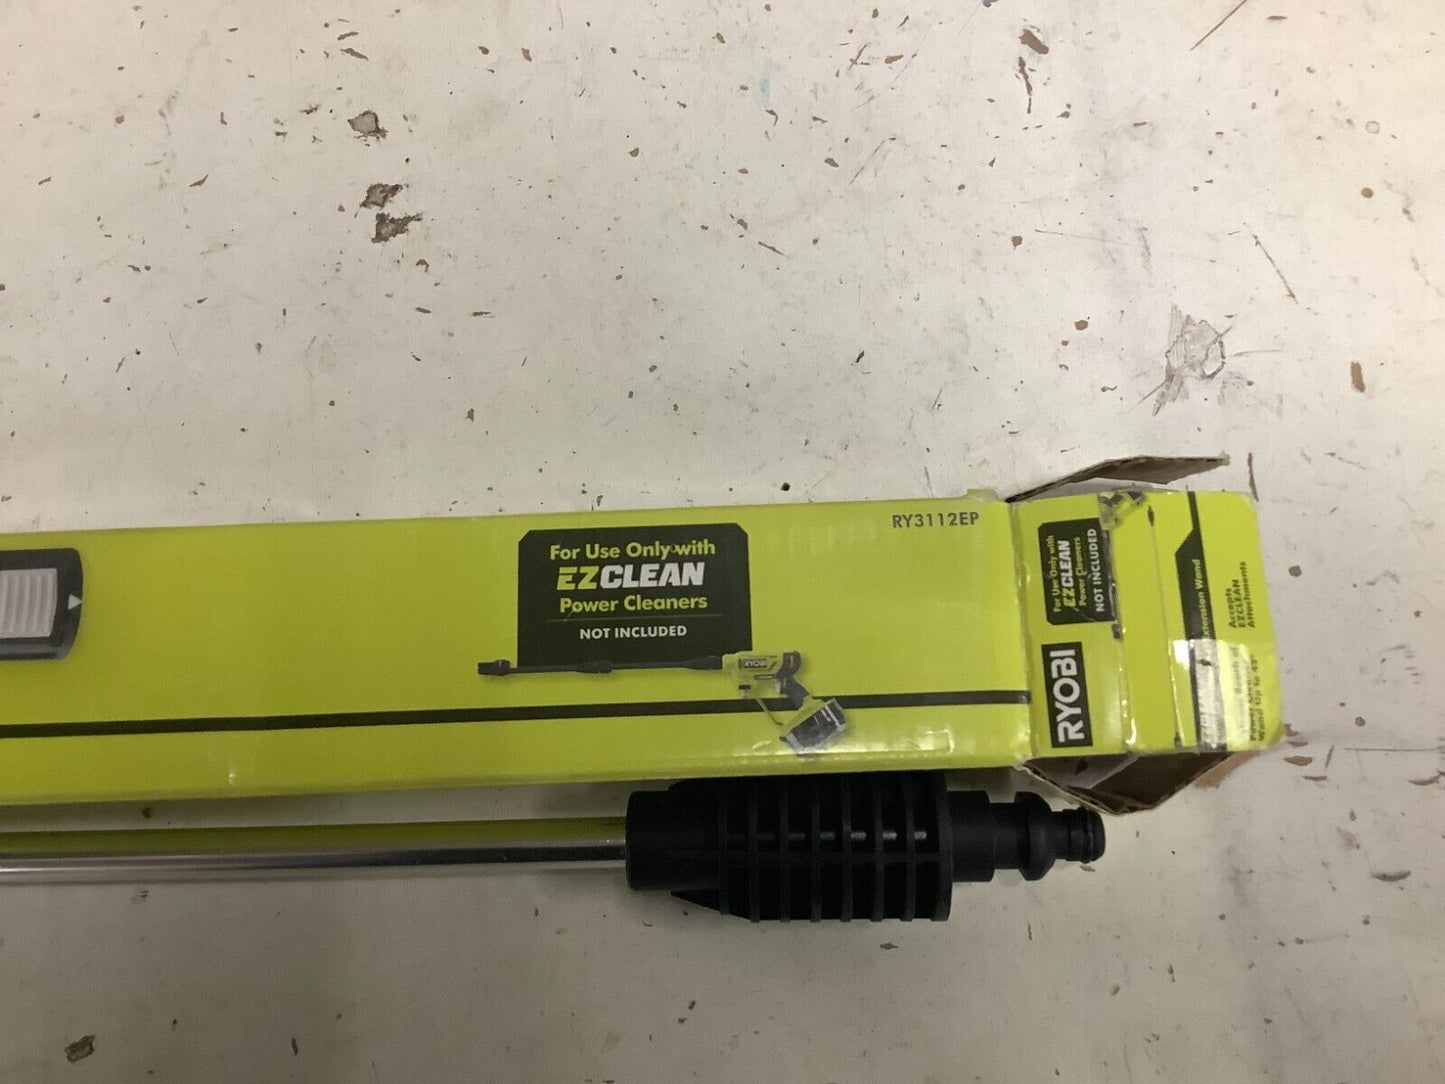 EZClean Power Cleaner 42" Extension Pole - Like New